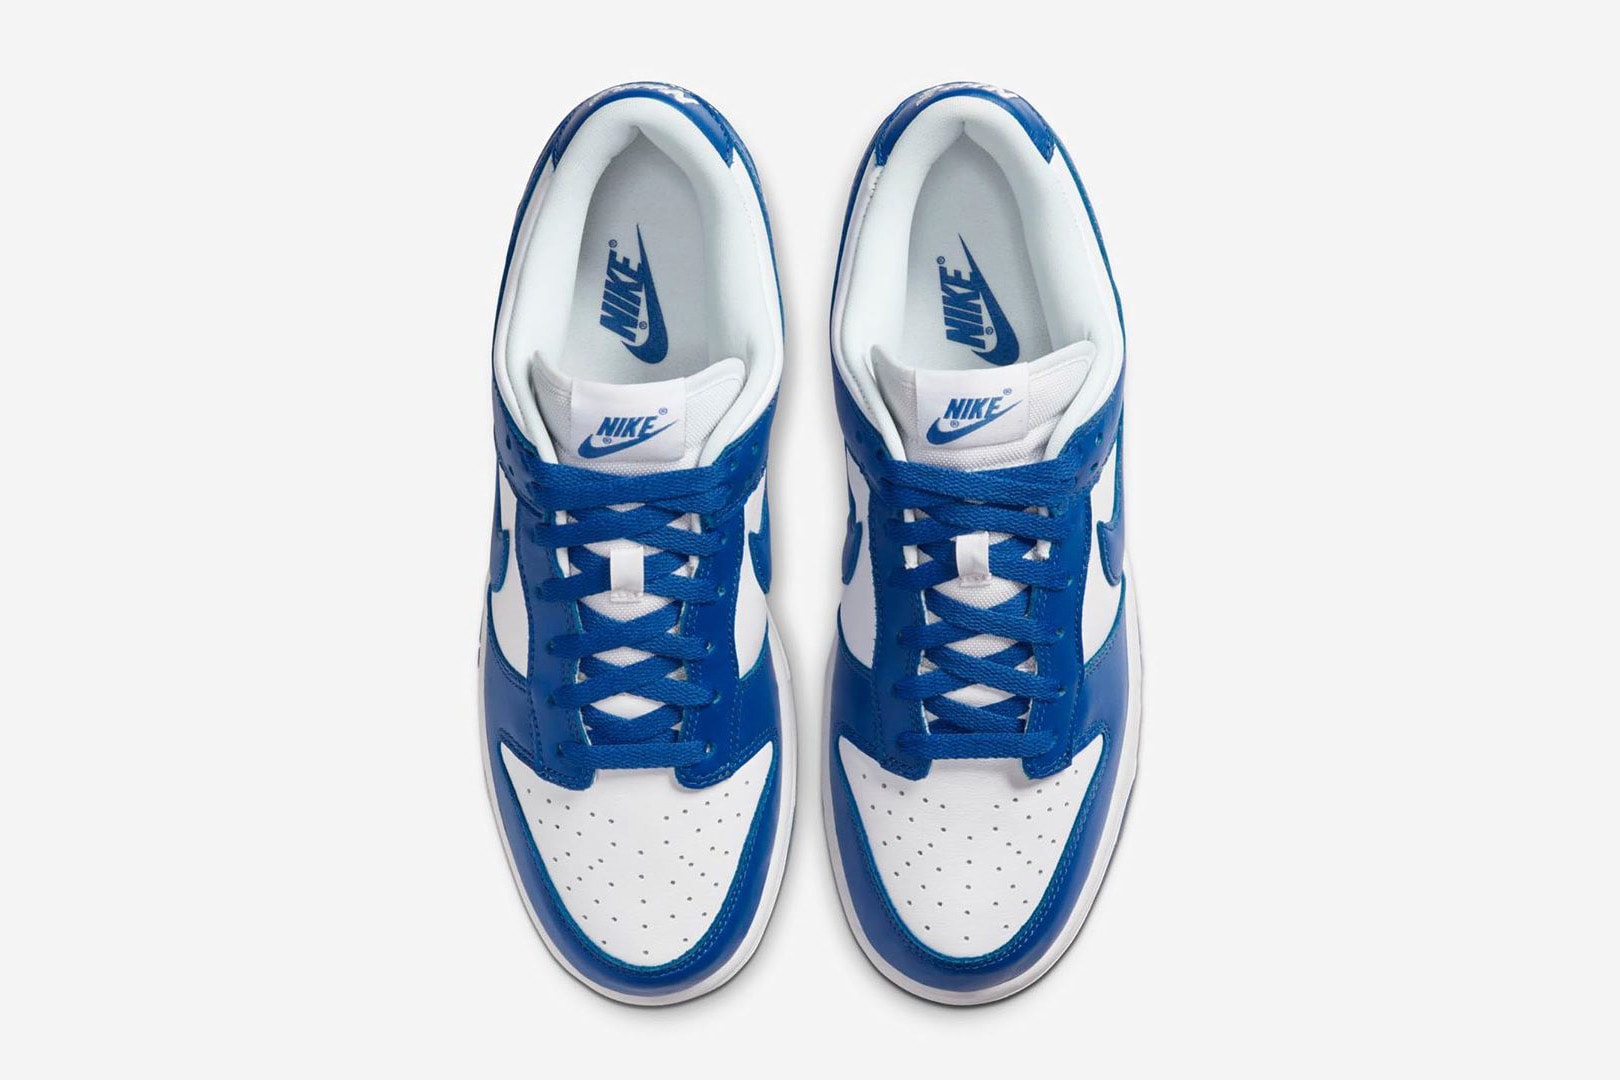 Nike SB Dunk Low "Be True To Your School Pack"